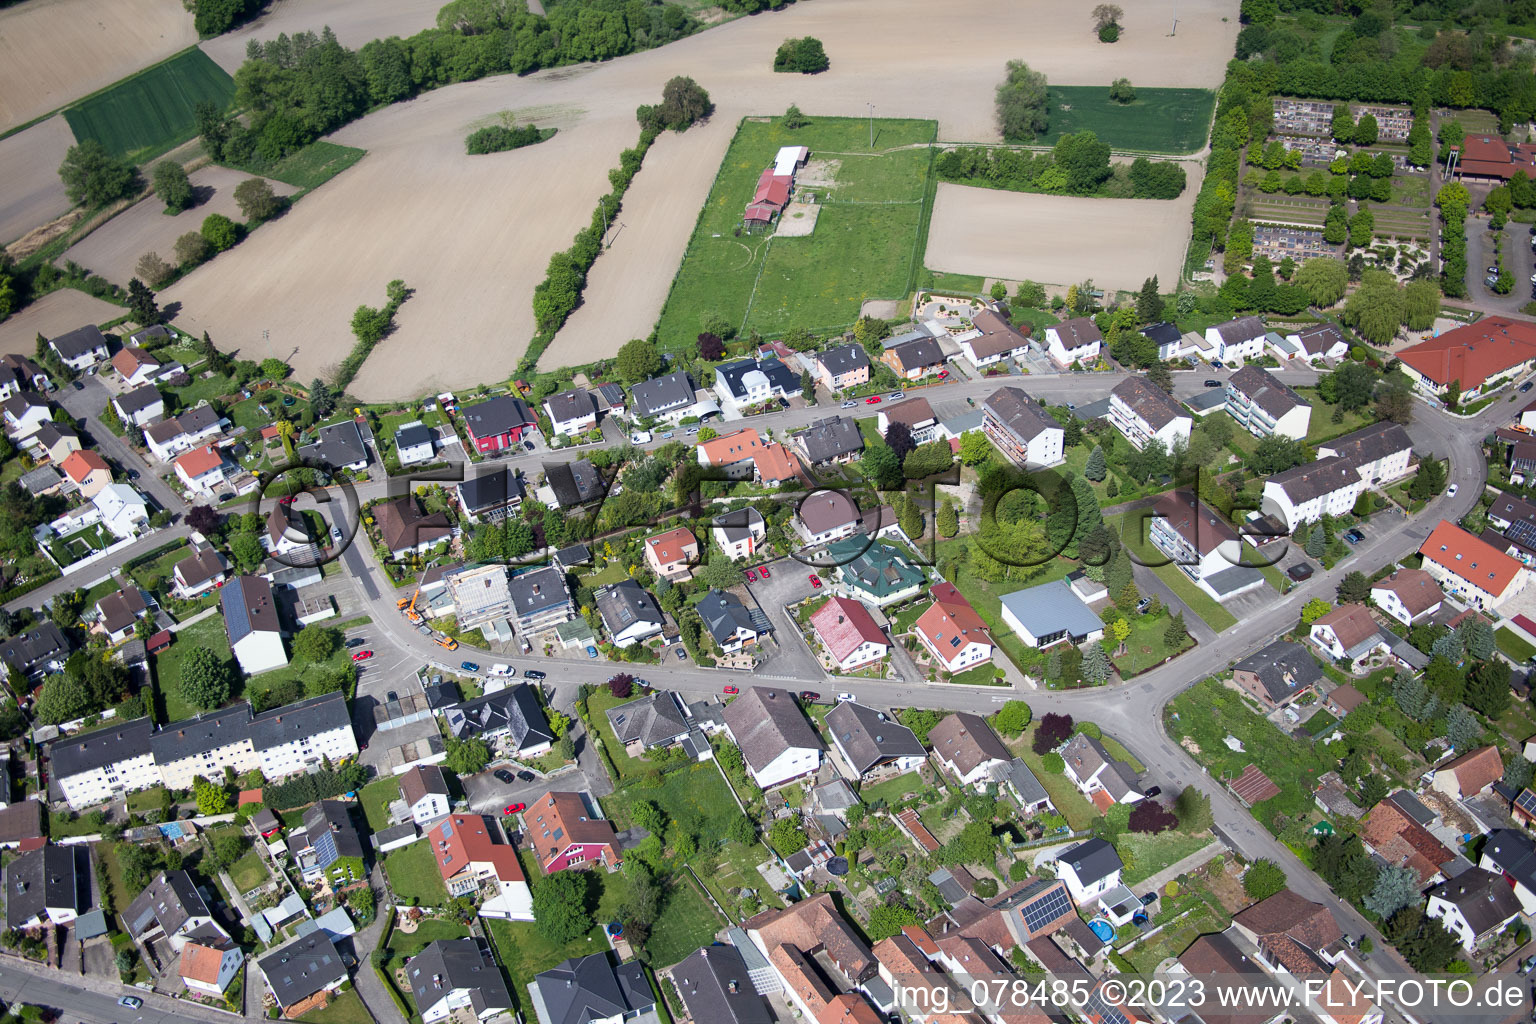 Hagenbach in the state Rhineland-Palatinate, Germany seen from a drone